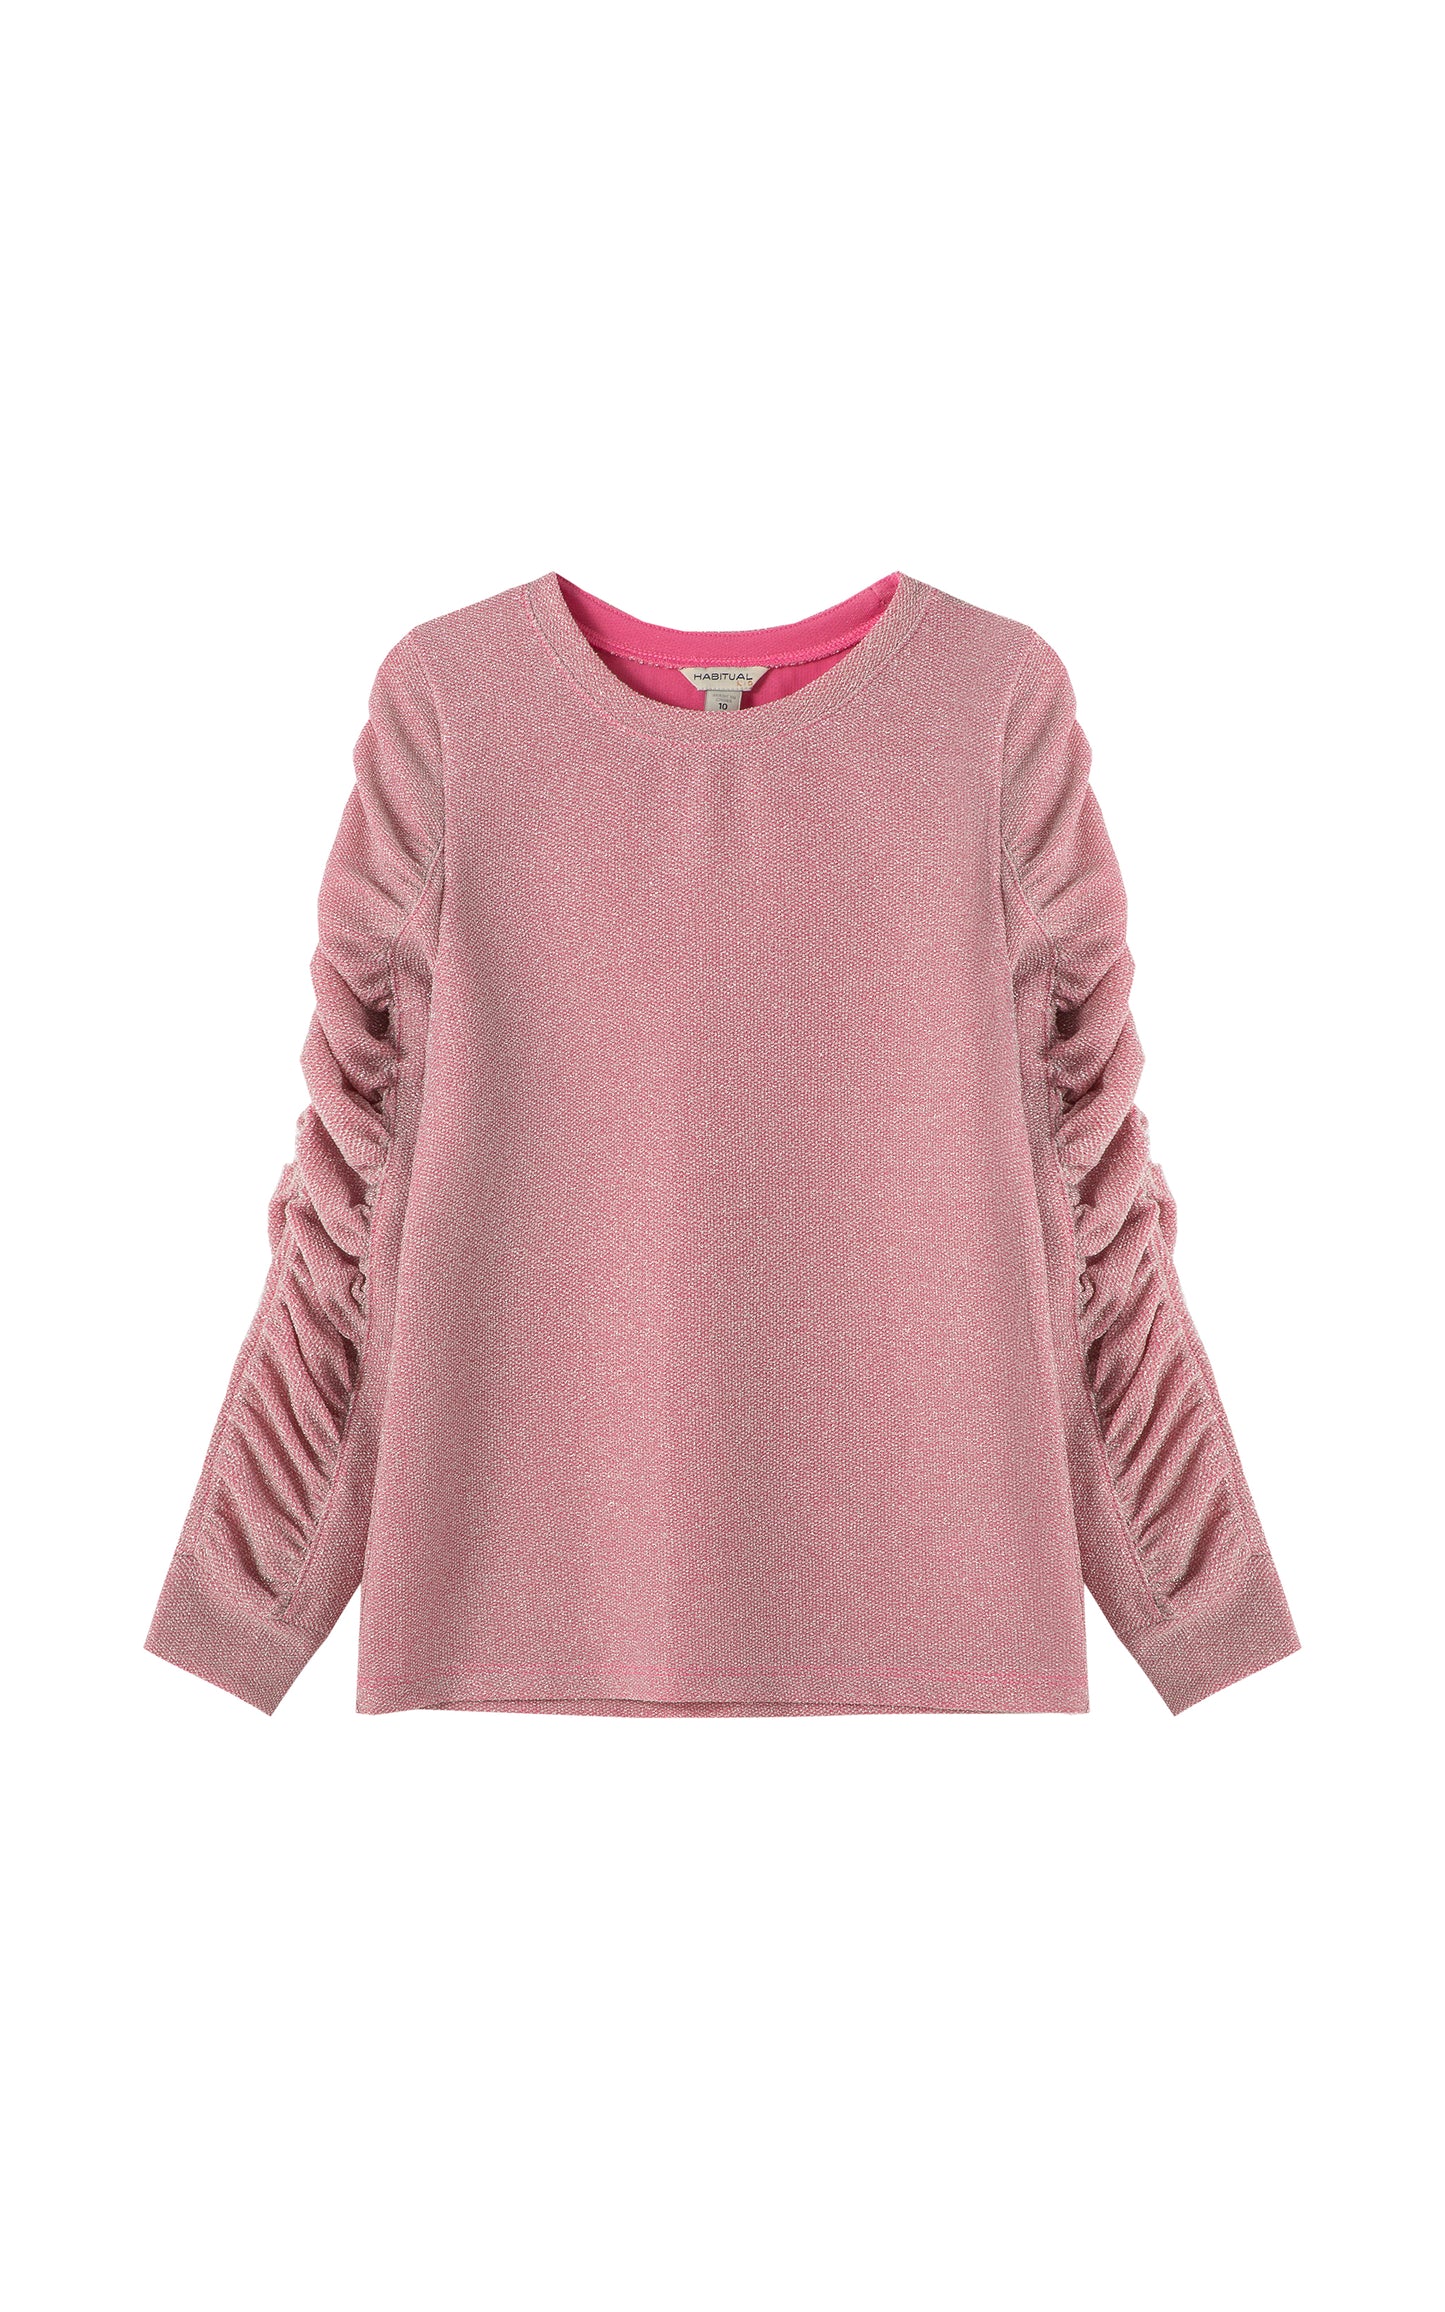 Front view of light pink crewneck top with Metallic accents and gathered, long sleeves.